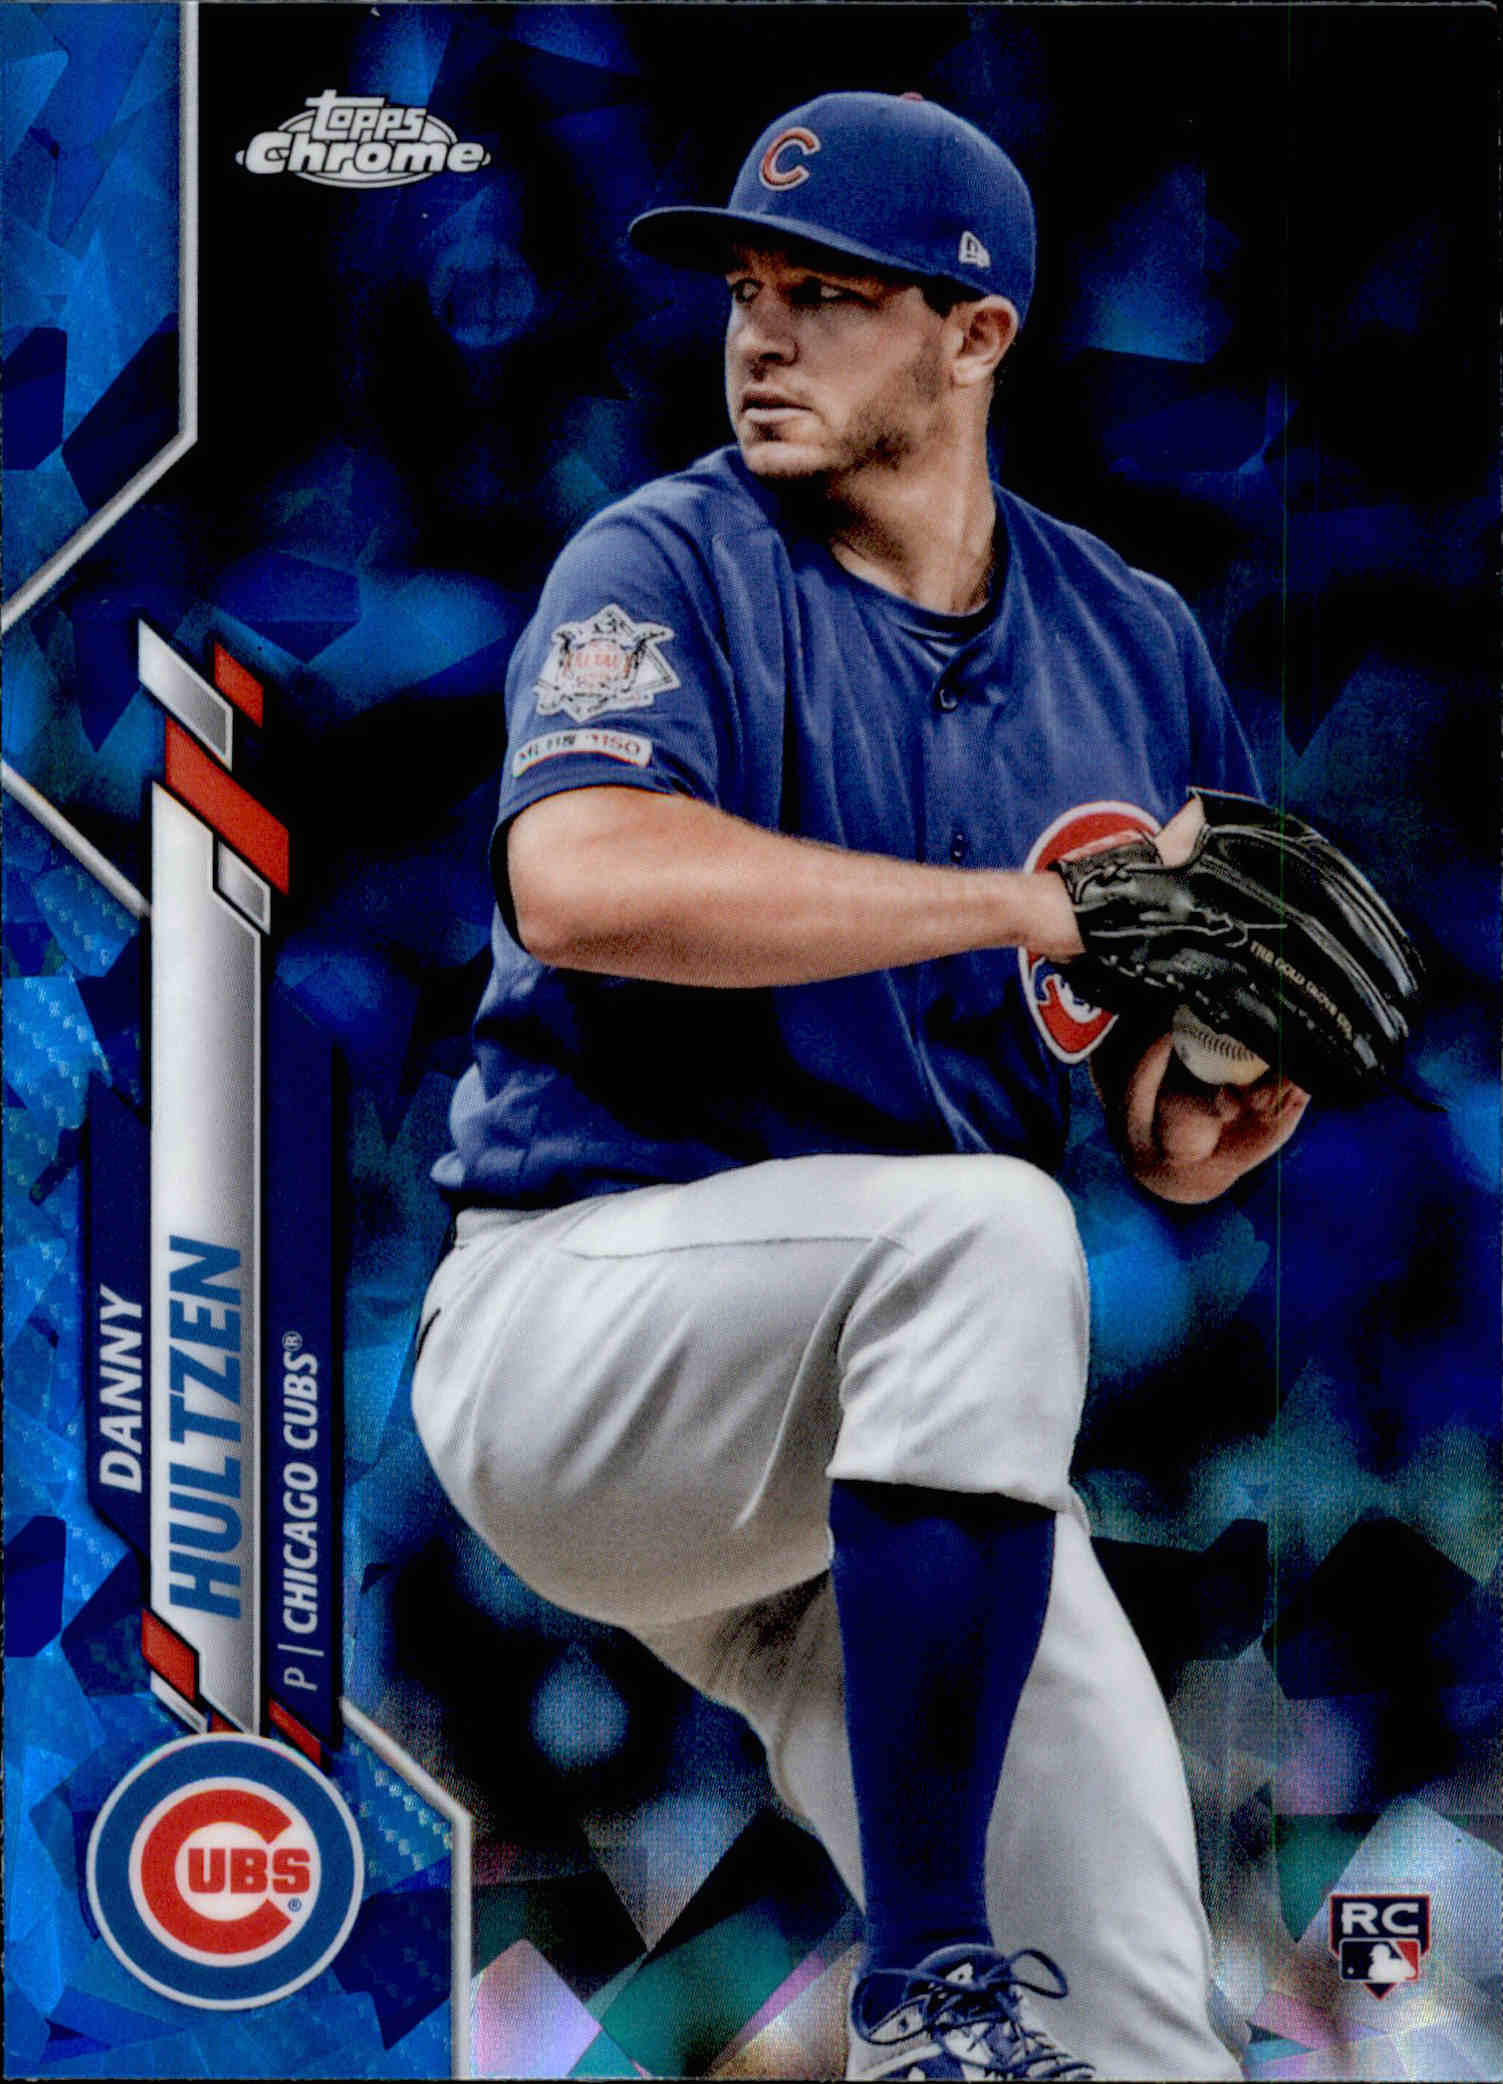 2020 Topps Chrome Sapphire #103 Danny Hultzen RC Rookie Card. rookie card picture